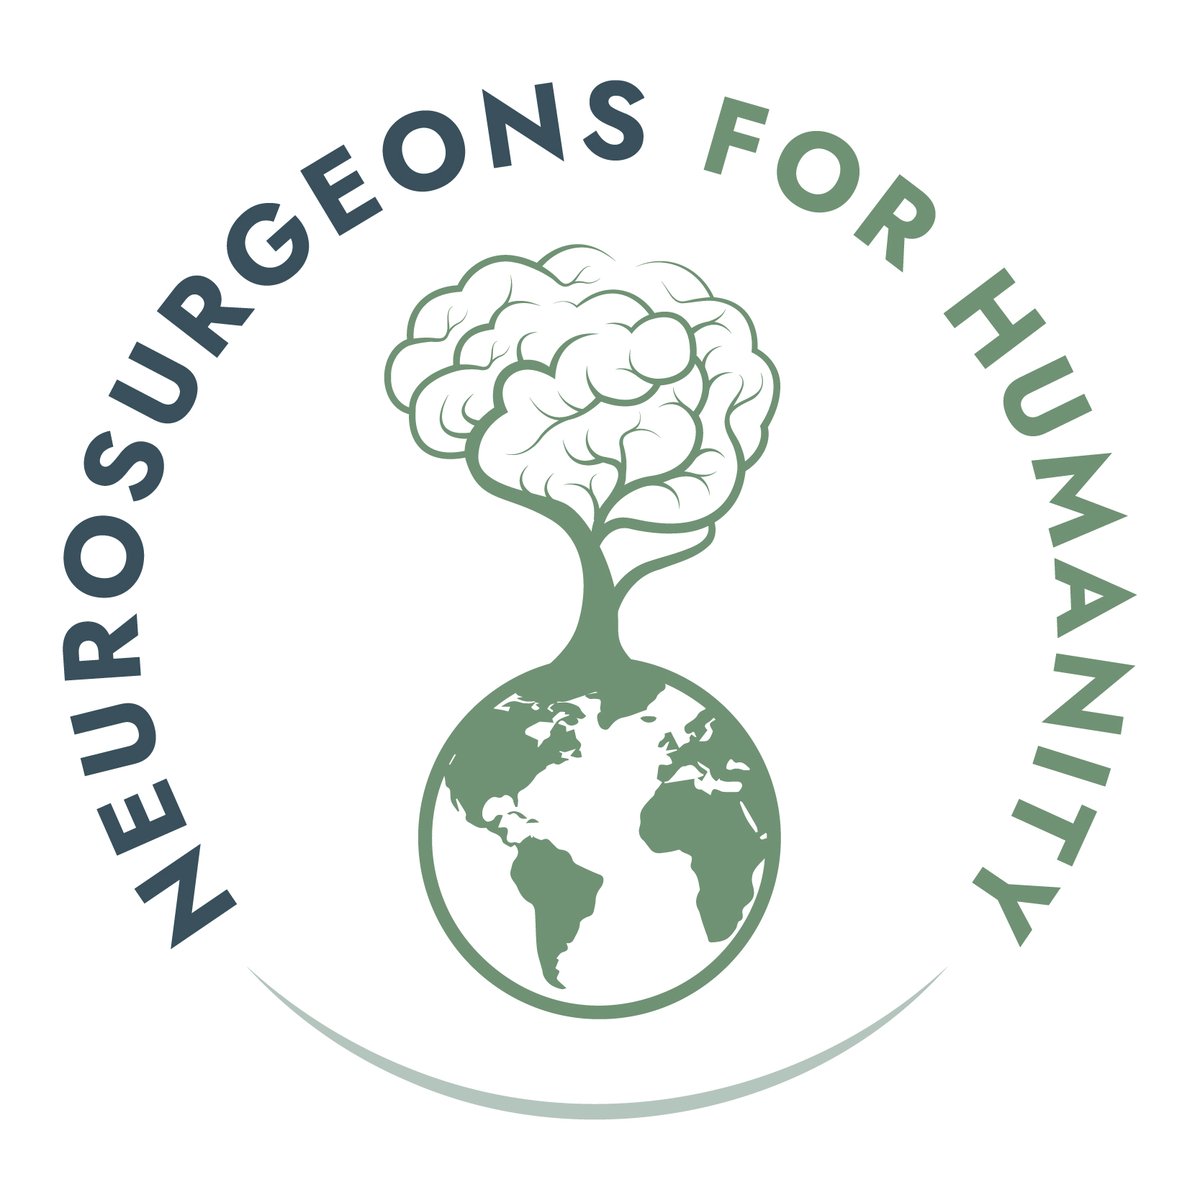 We are a dedicated team of neurosurgeons from the United States, committed to alleviating the suffering, promoting health, hope, and healing around the globe. We envision a world where every individual has access to quality neurosurgical care and support.  nsgfh.org